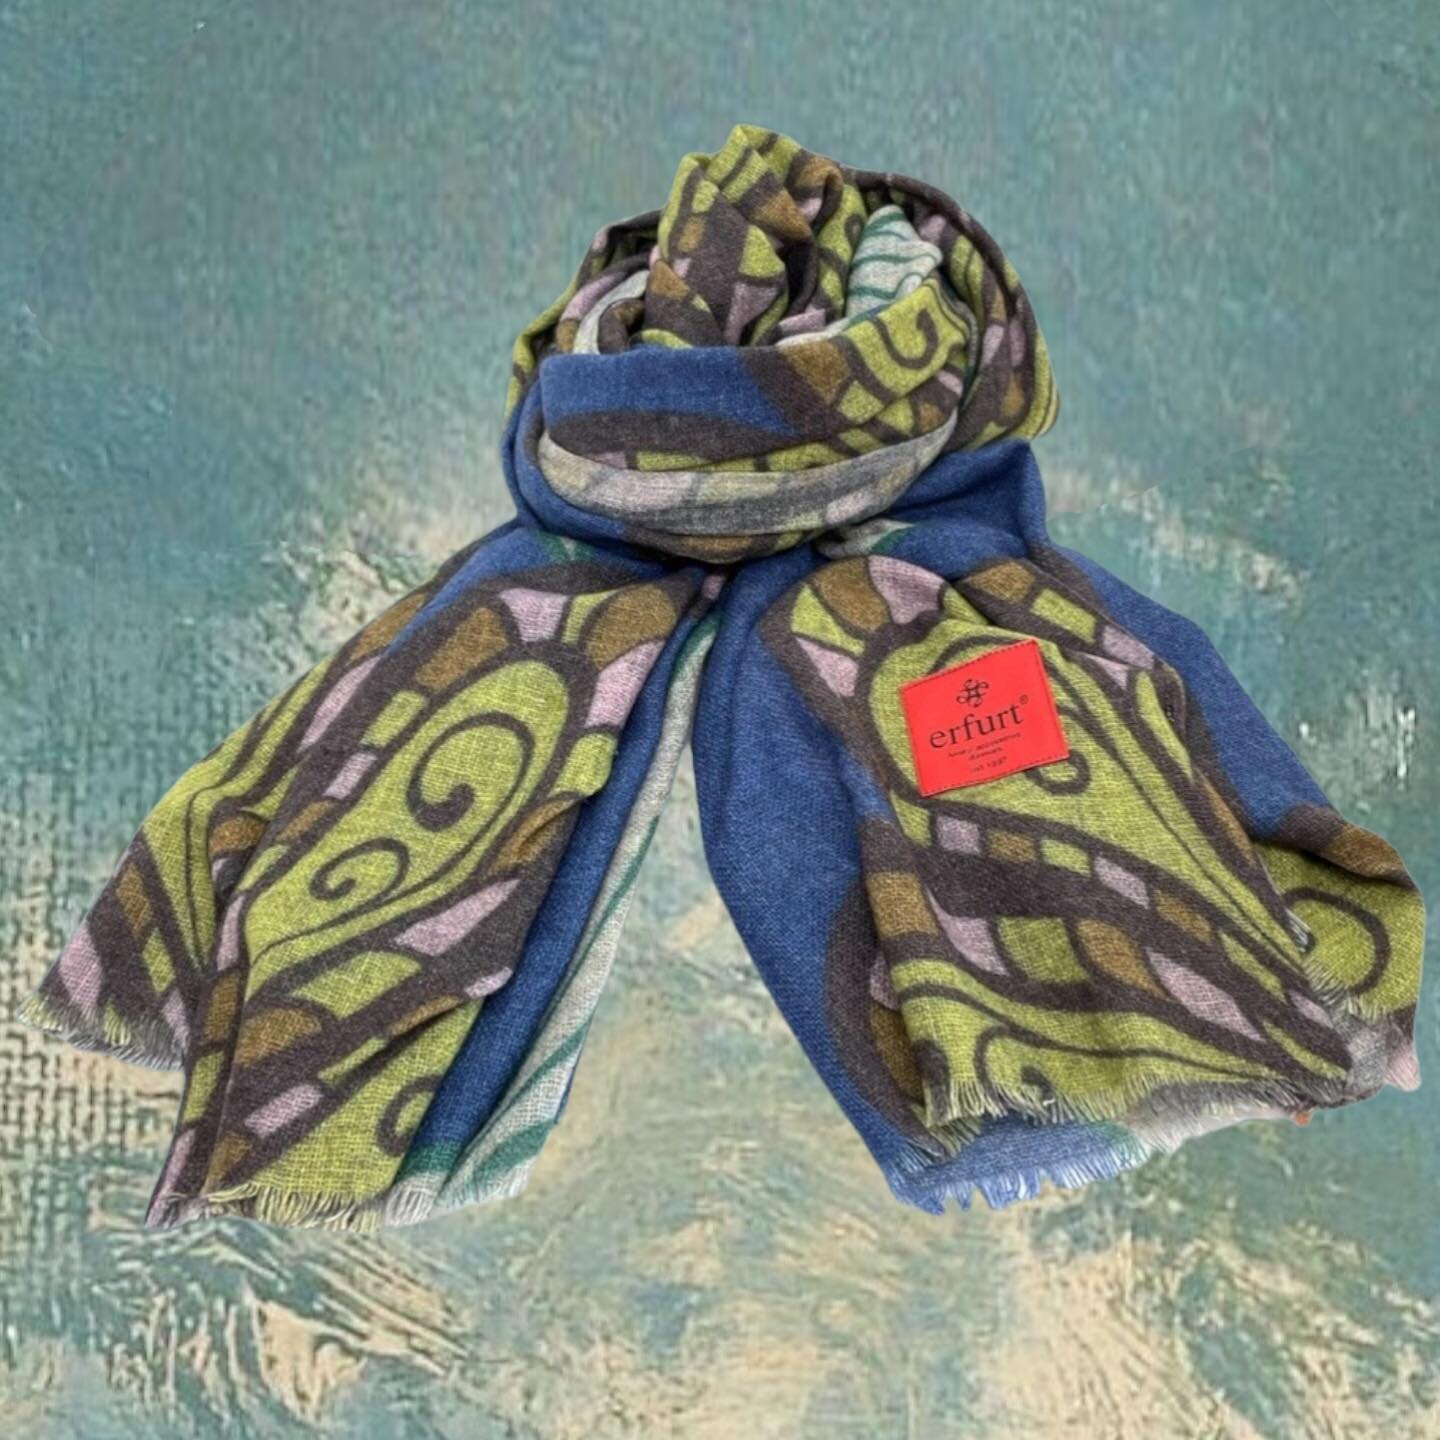 Soft lambswool printed paisley scarf Buy now. Free Worldwide shipping on orders over &euro;120,- @erfurtluxury 💙 #softscarves #luxury #paisley #freeworldwideshipping #foulard #&eacute;charpe #sciarpa #bufandas #schal 💙